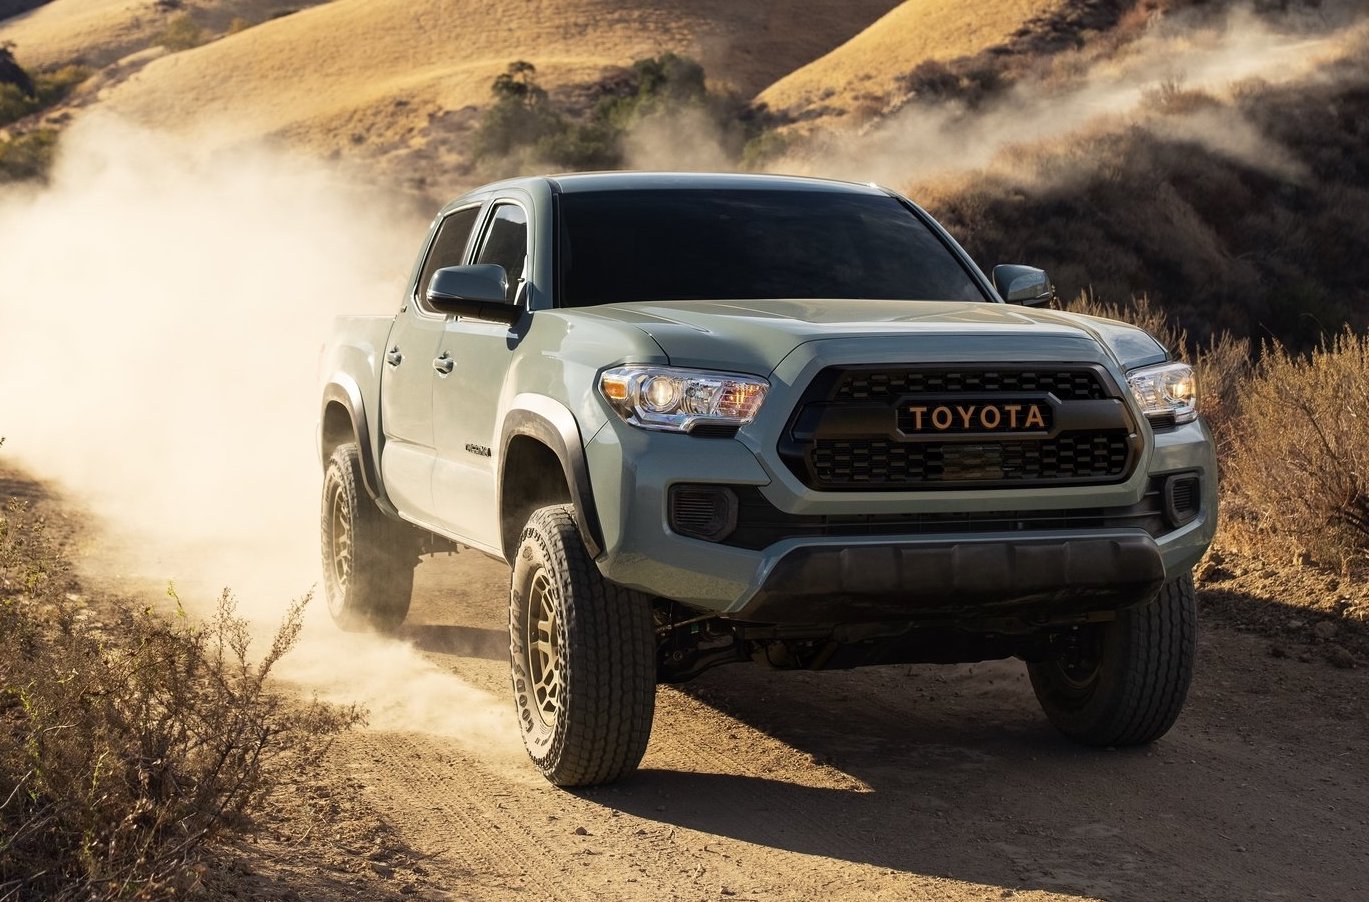 Toyota global sales and production drop 9% in May